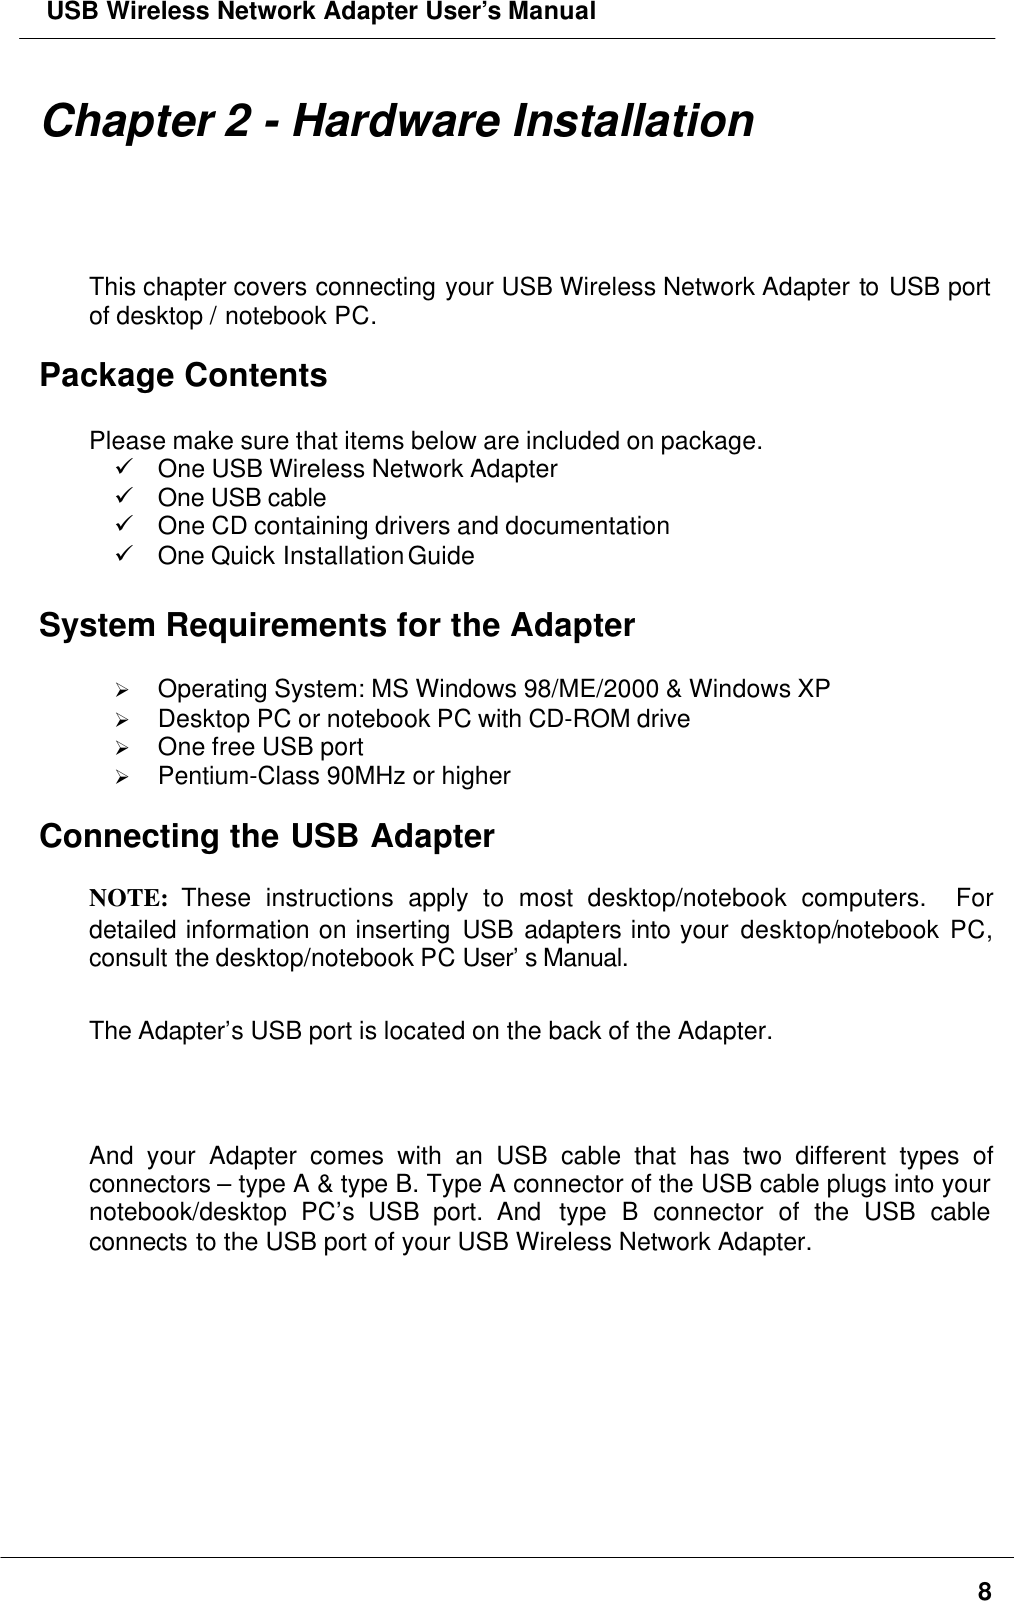  USB Wireless Network Adapter User’s Manual8Chapter 2 - Hardware InstallationThis chapter covers connecting your USB Wireless Network Adapter to USB portof desktop / notebook PC.Package ContentsPlease make sure that items below are included on package.ü One USB Wireless Network Adapterü One USB cableü One CD containing drivers and documentationü One Quick Installation GuideSystem Requirements for the AdapterØ Operating System: MS Windows 98/ME/2000 &amp; Windows XPØ Desktop PC or notebook PC with CD-ROM driveØ One free USB portØ Pentium-Class 90MHz or higherConnecting the USB AdapterNOTE: These instructions apply to most desktop/notebook computers.  Fordetailed information on inserting USB adapters into your desktop/notebook PC,consult the desktop/notebook PC User’s Manual.The Adapter’s USB port is located on the back of the Adapter.And your Adapter comes with an USB cable that has two different types ofconnectors – type A &amp; type B. Type A connector of the USB cable plugs into yournotebook/desktop PC’s USB port. And  type B connector of the USB cableconnects to the USB port of your USB Wireless Network Adapter.